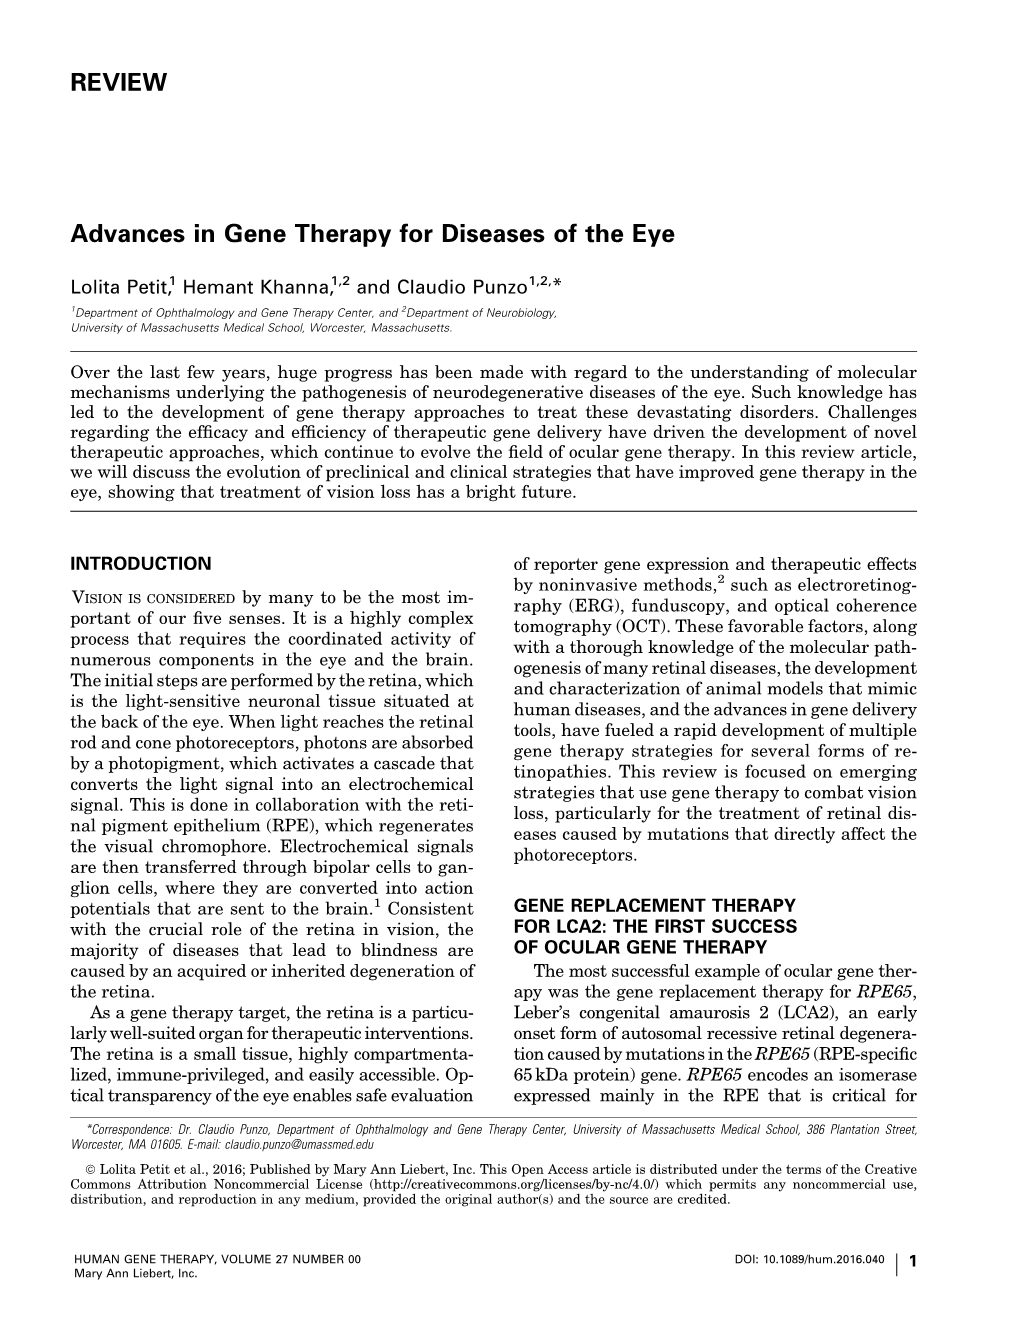 REVIEW Advances in Gene Therapy for Diseases of The